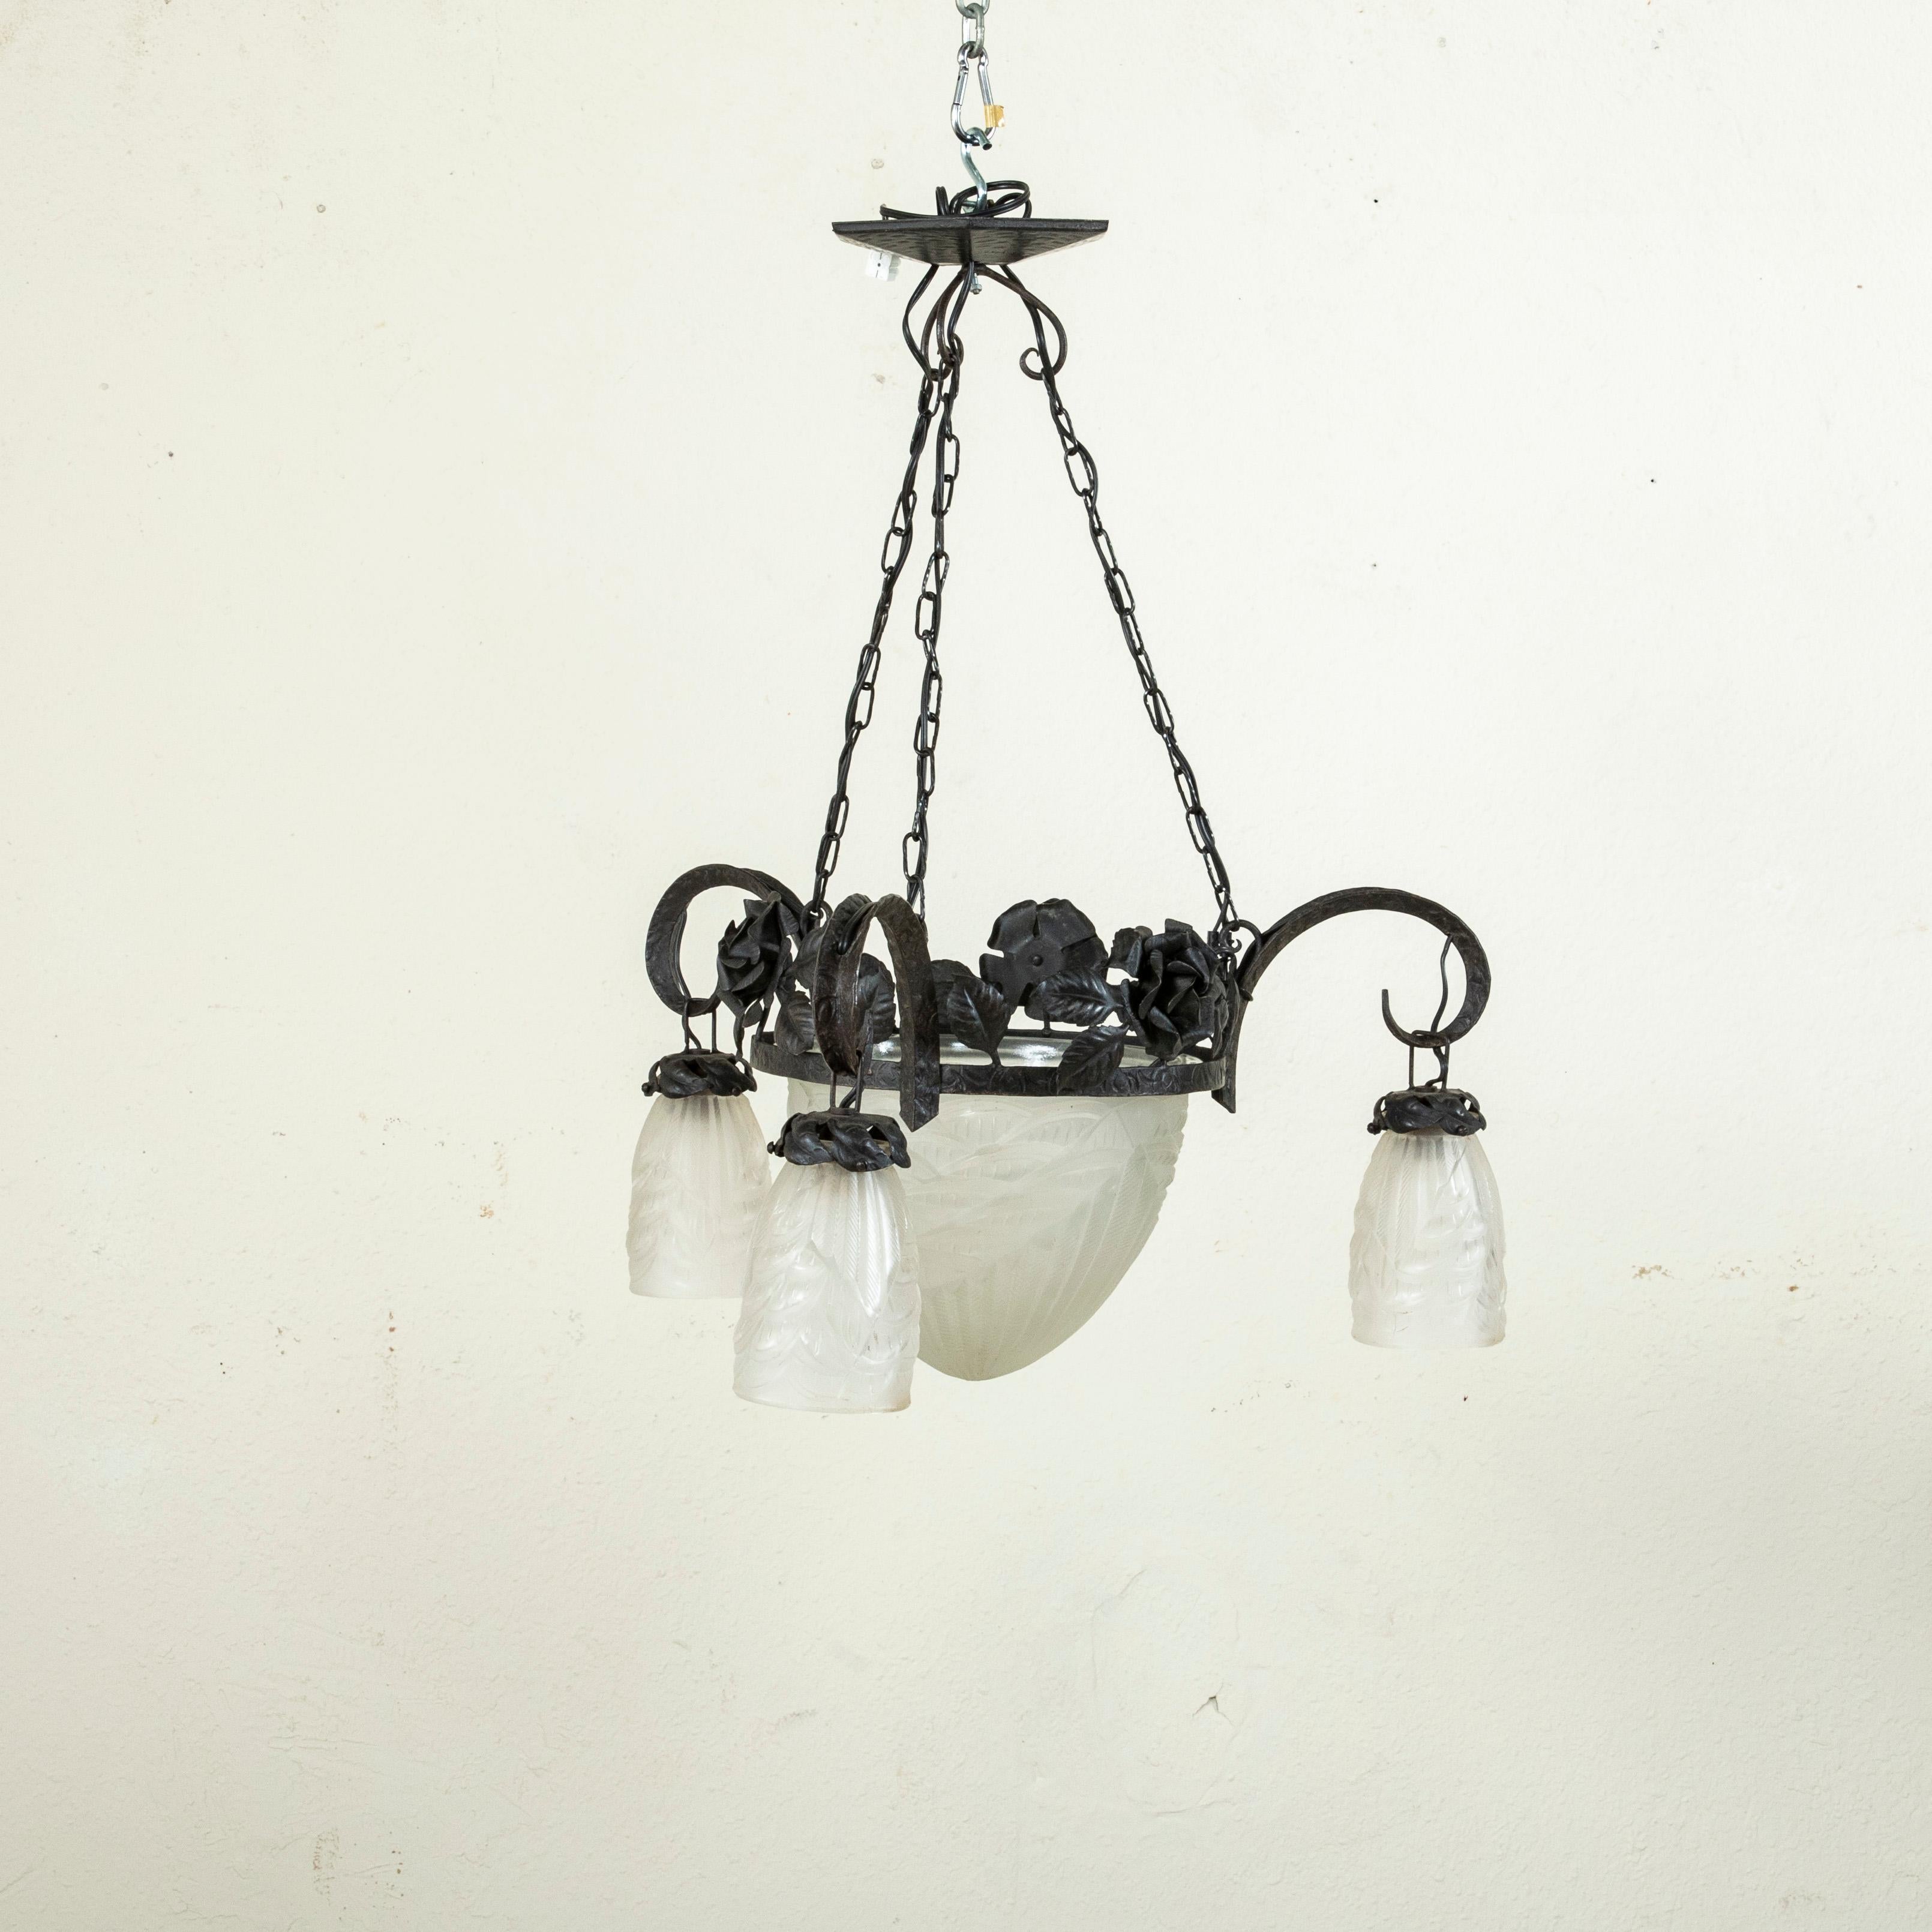 Early 20th Century French Art Deco Period Iron and Glass Chandelier, Four Lights In Good Condition For Sale In Fayetteville, AR